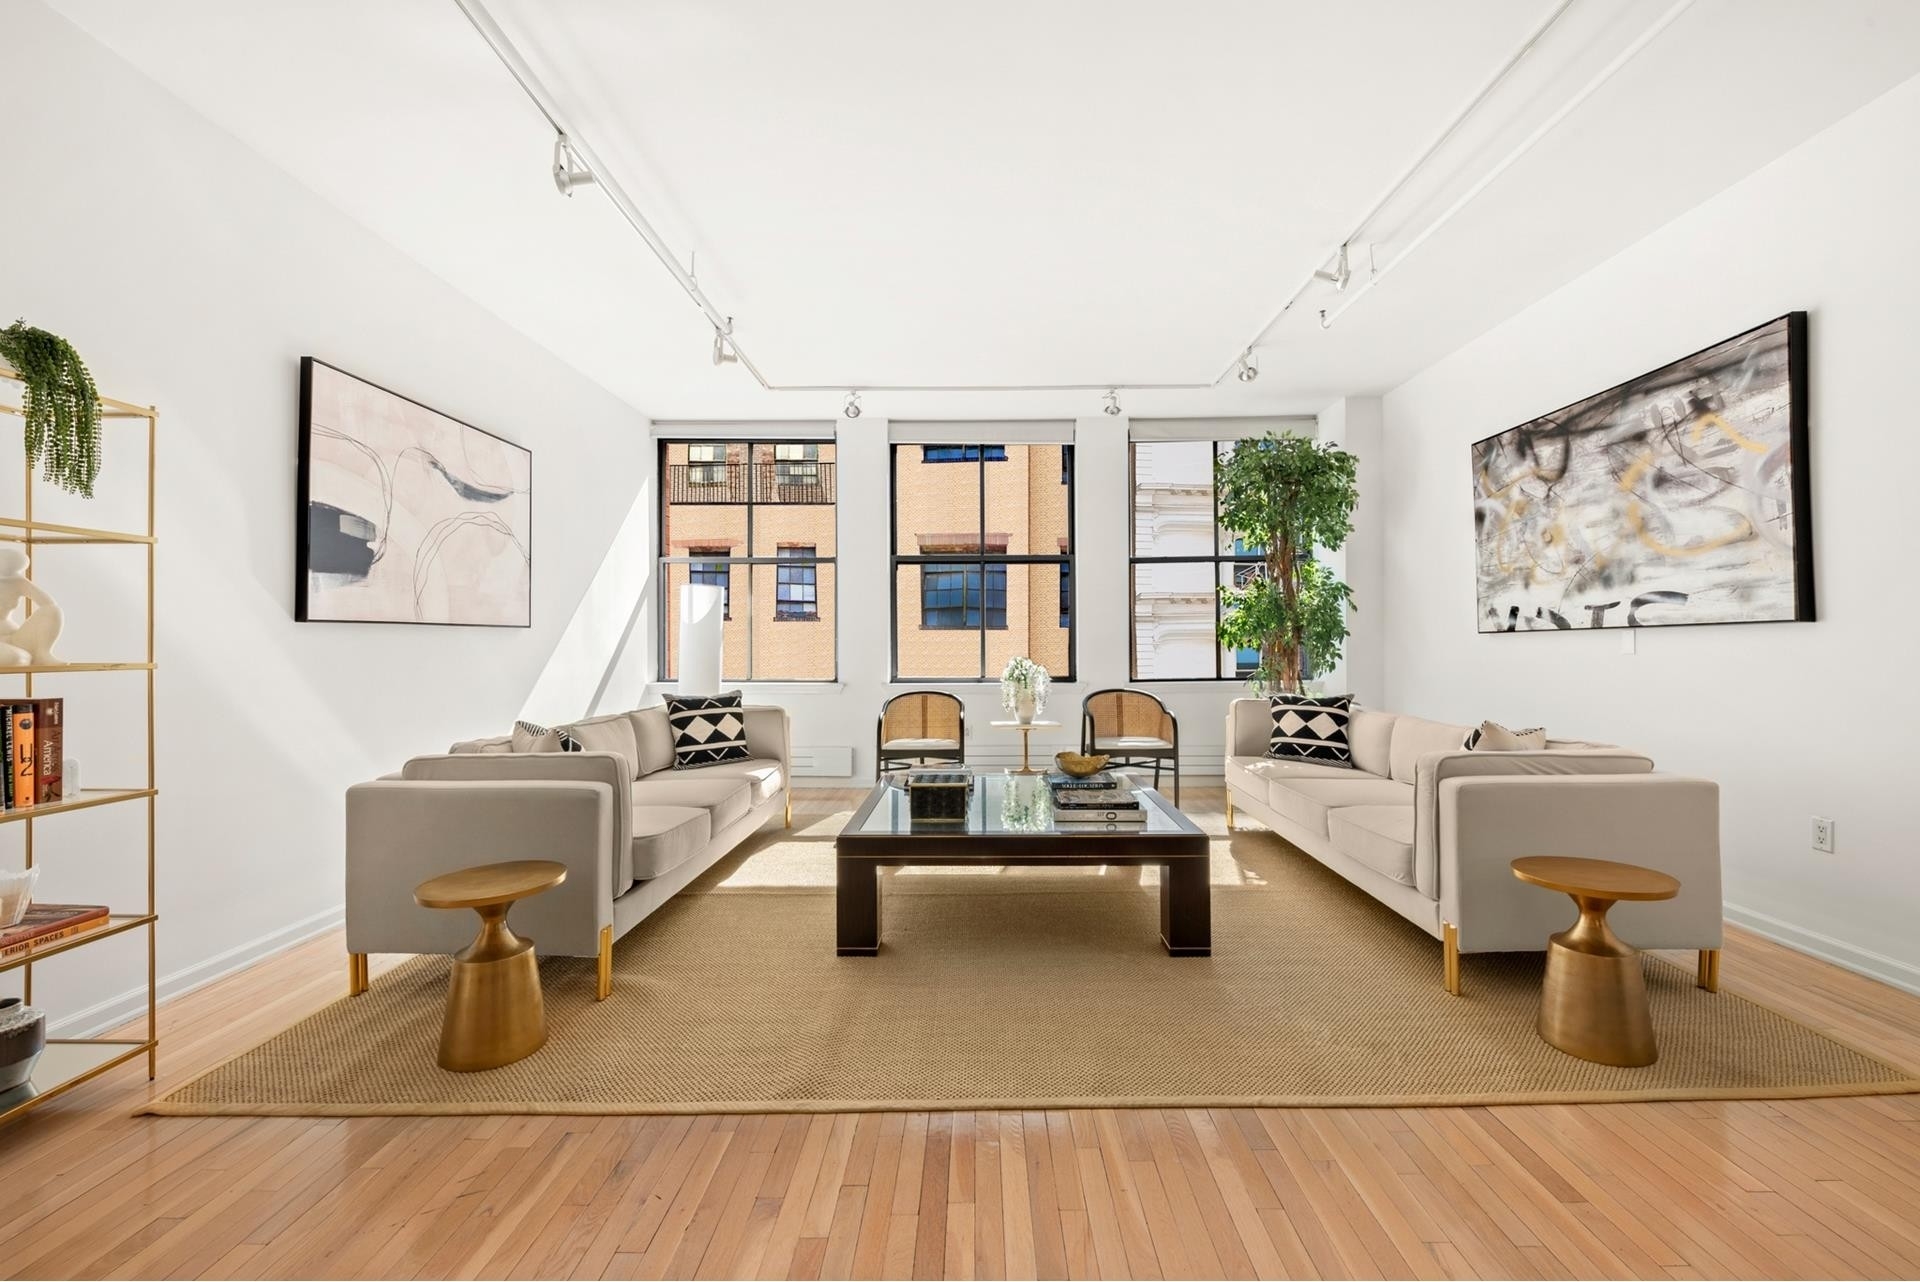 Condominium for Sale at 7 WOOSTER ST, 3A SoHo, New York, NY 10013